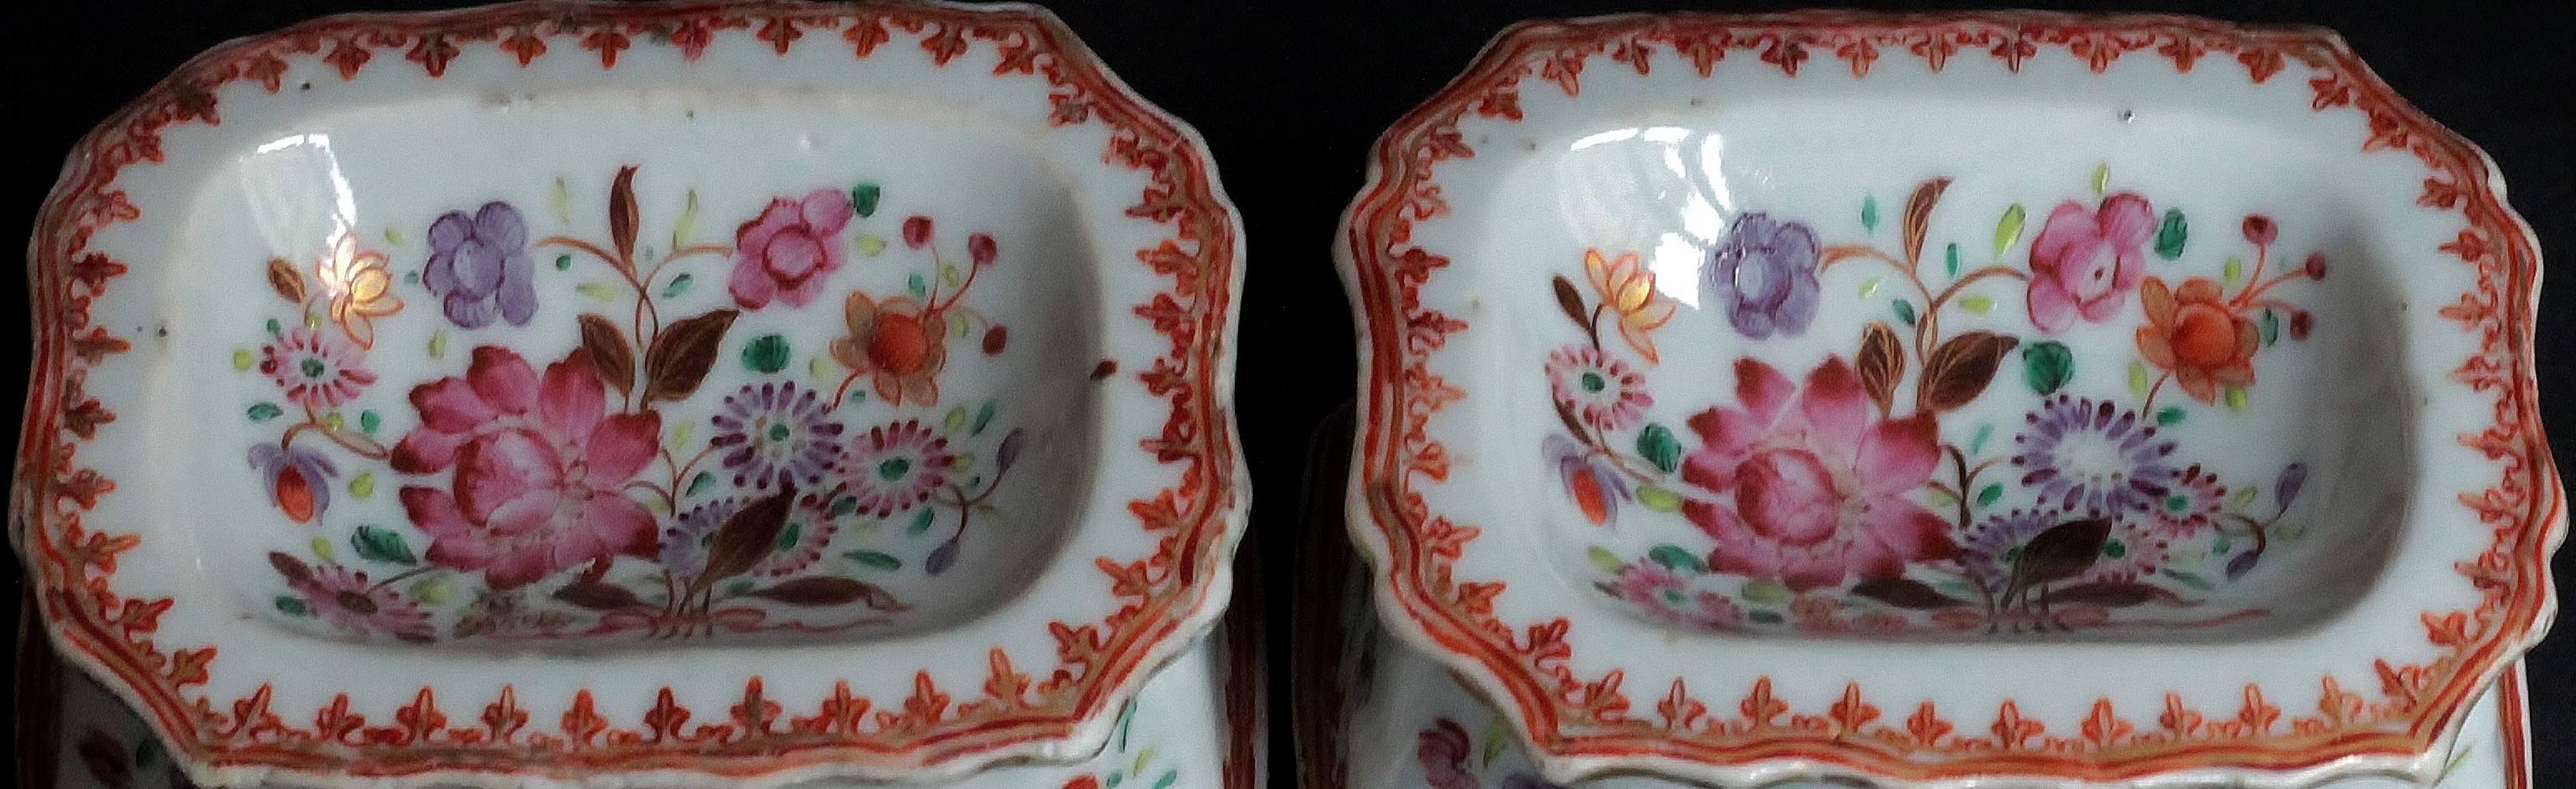 Rococo Pair of Rectangular Salts in Porcelain of China, Qianlong Period, 18th Century For Sale